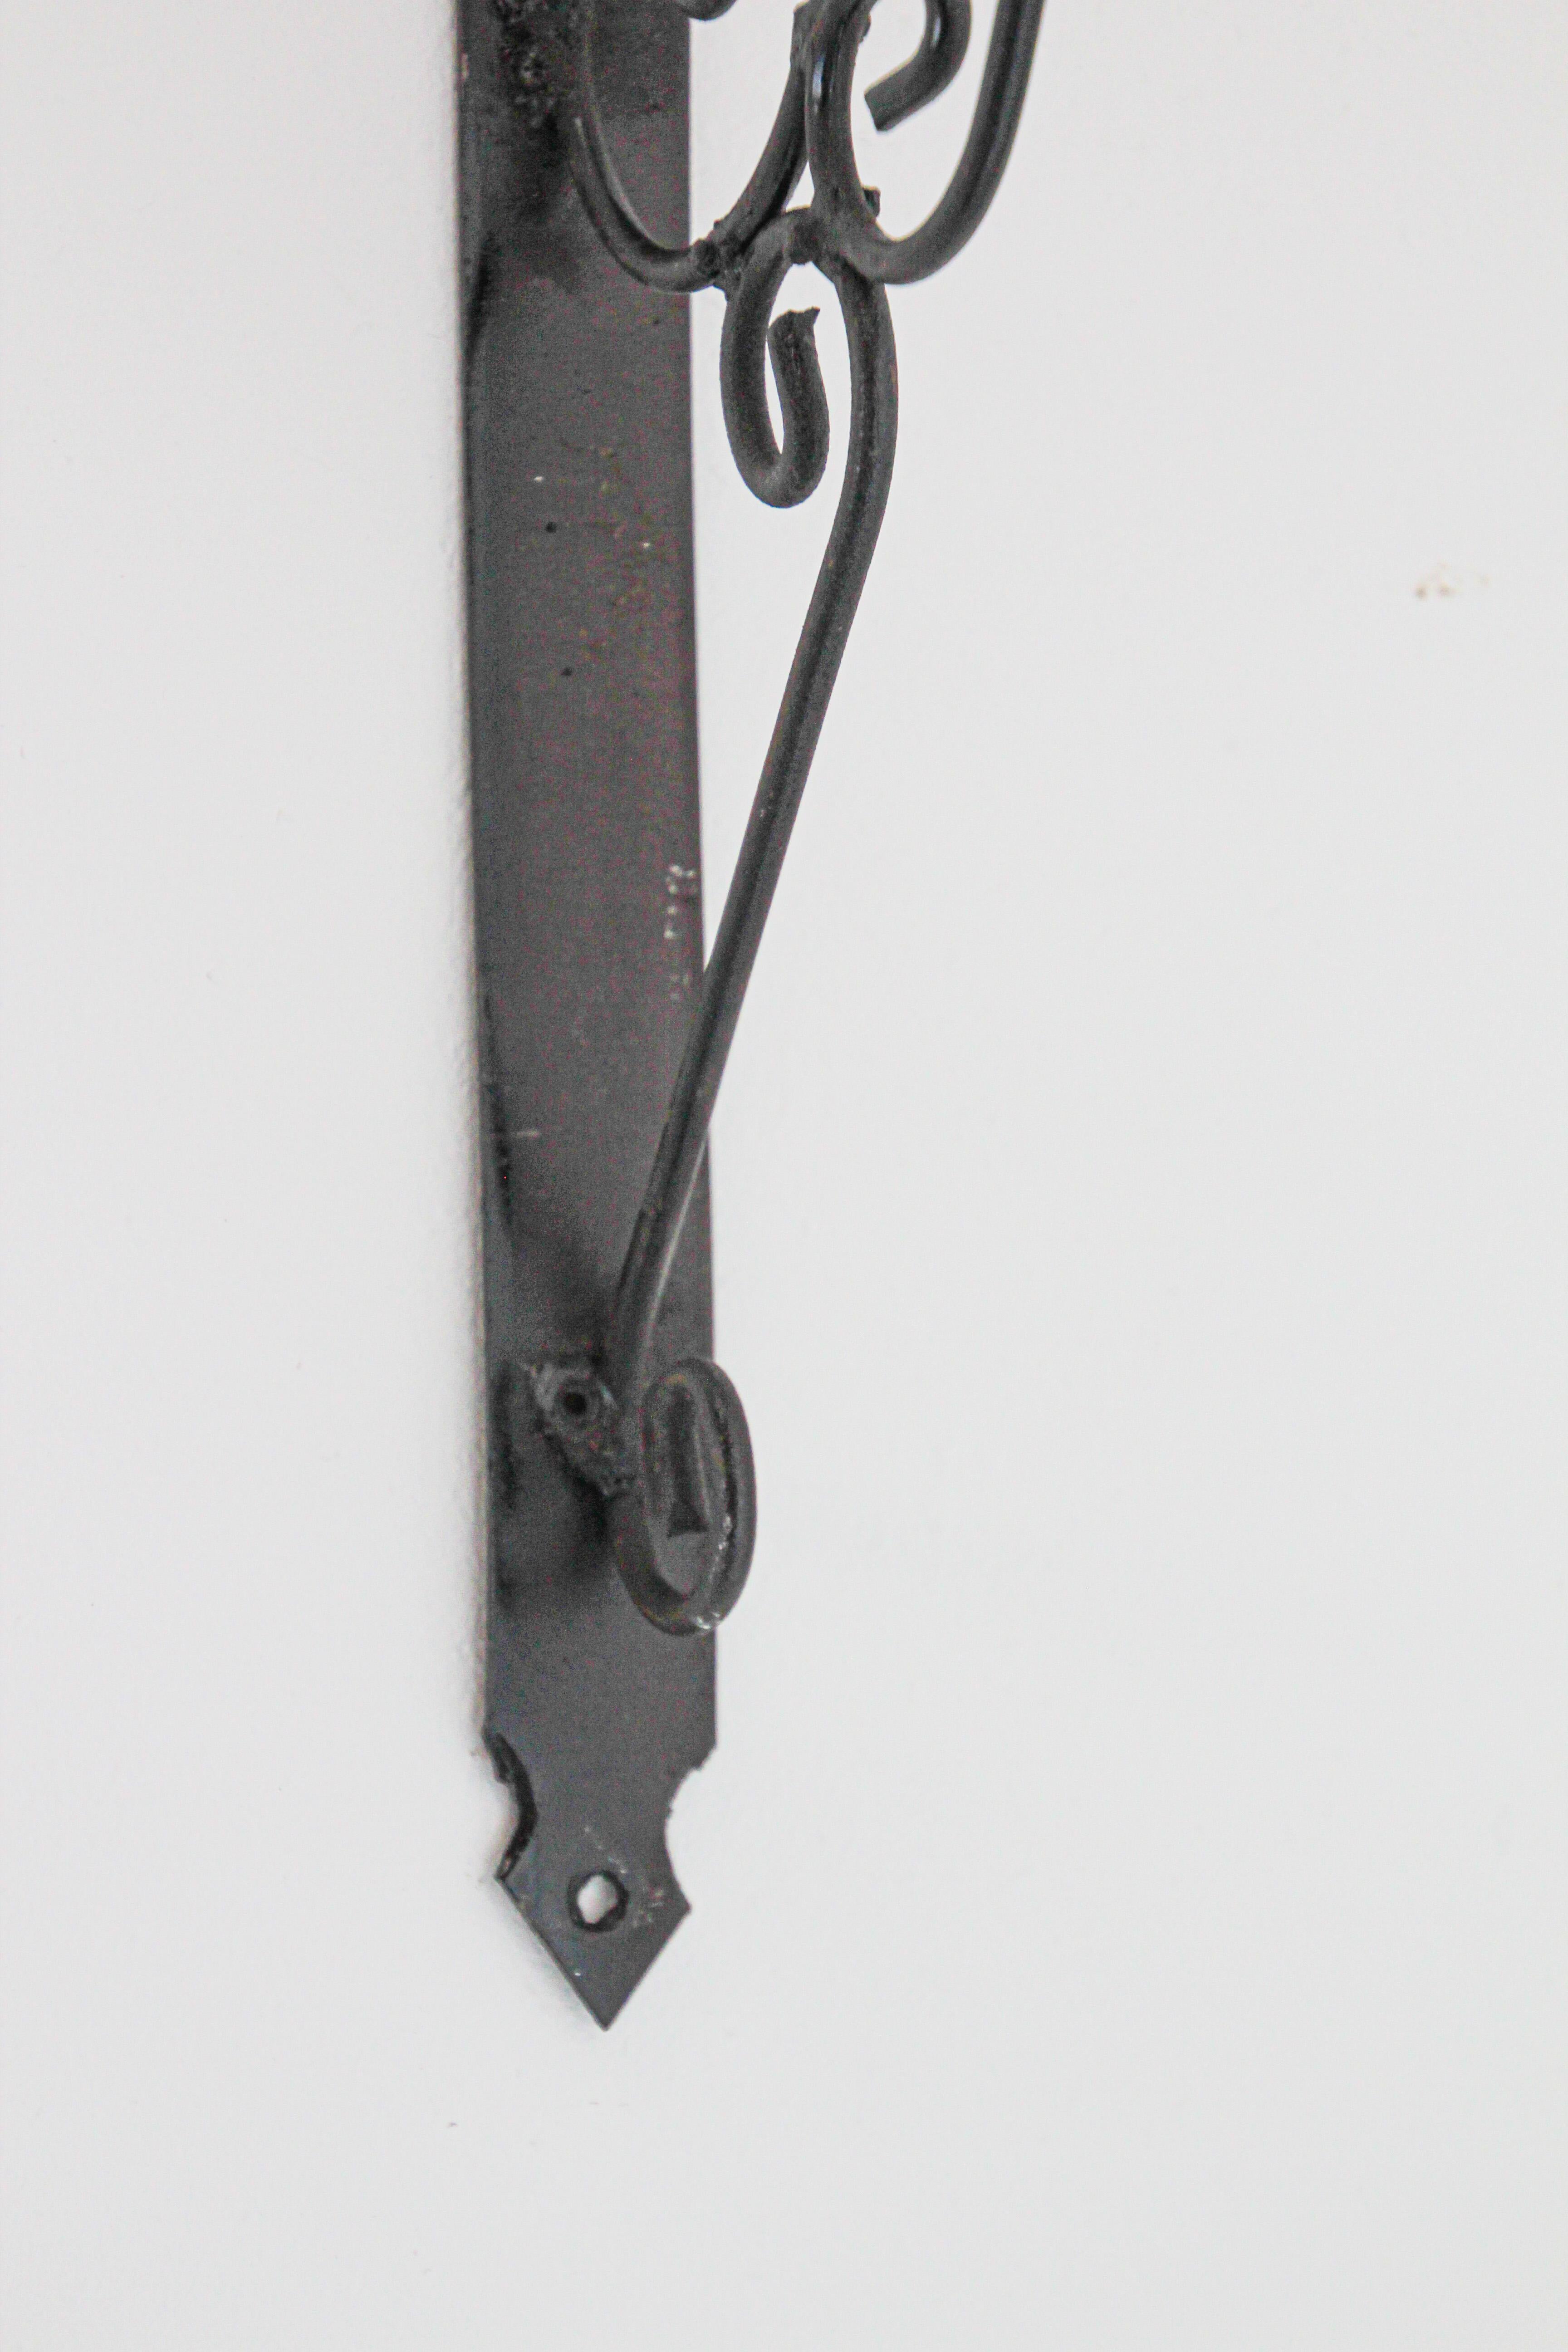 Moroccan Wall Mounted Iron Bracket for Lanterns or Signs For Sale